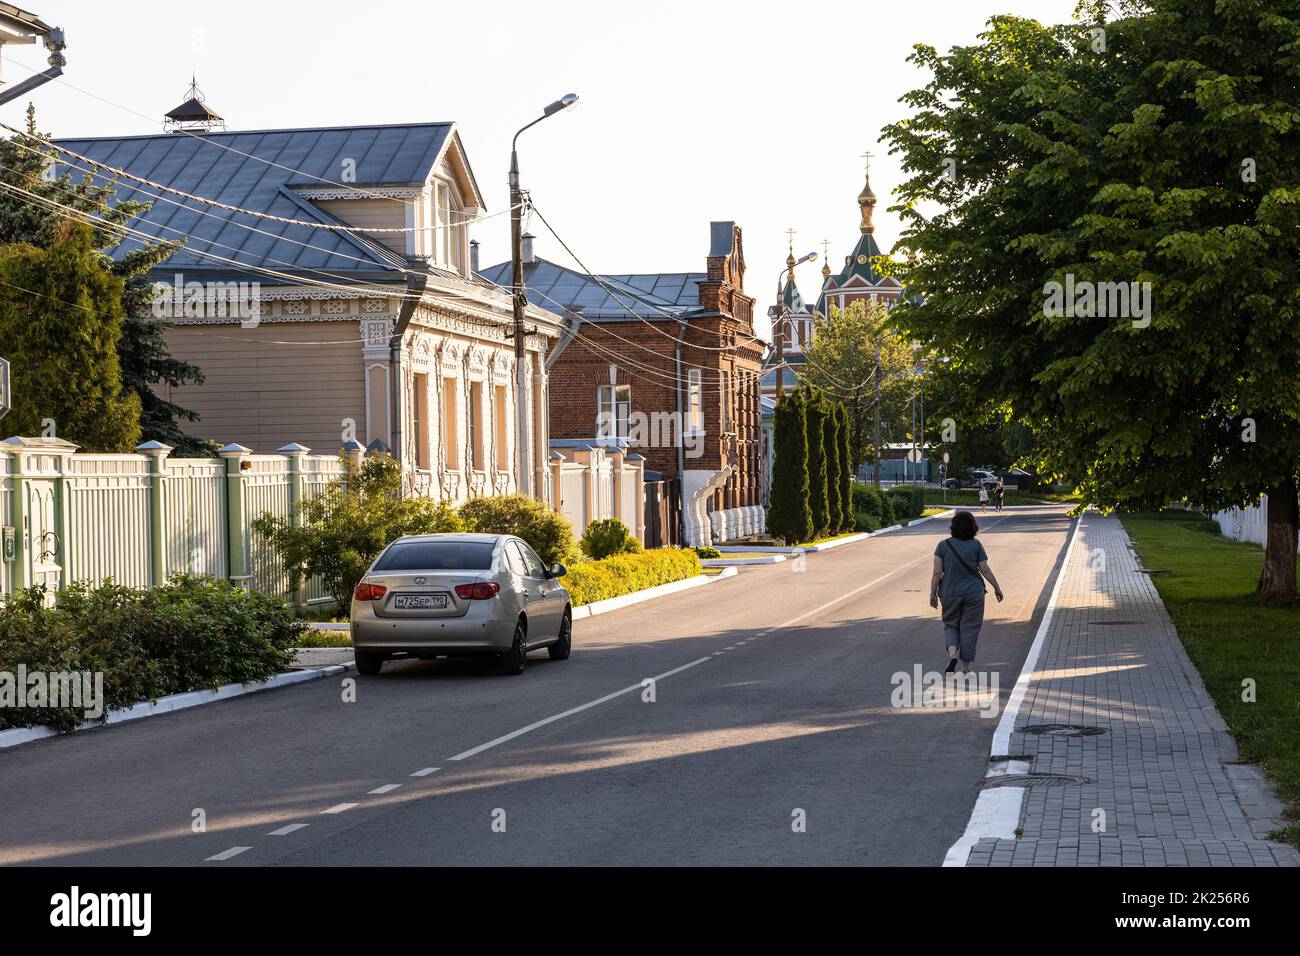 Kolomna, Russia - June 9, 2022: Kazakov street with typical old wooden houses in Old Kolomna city on sunny summer evening Stock Photo